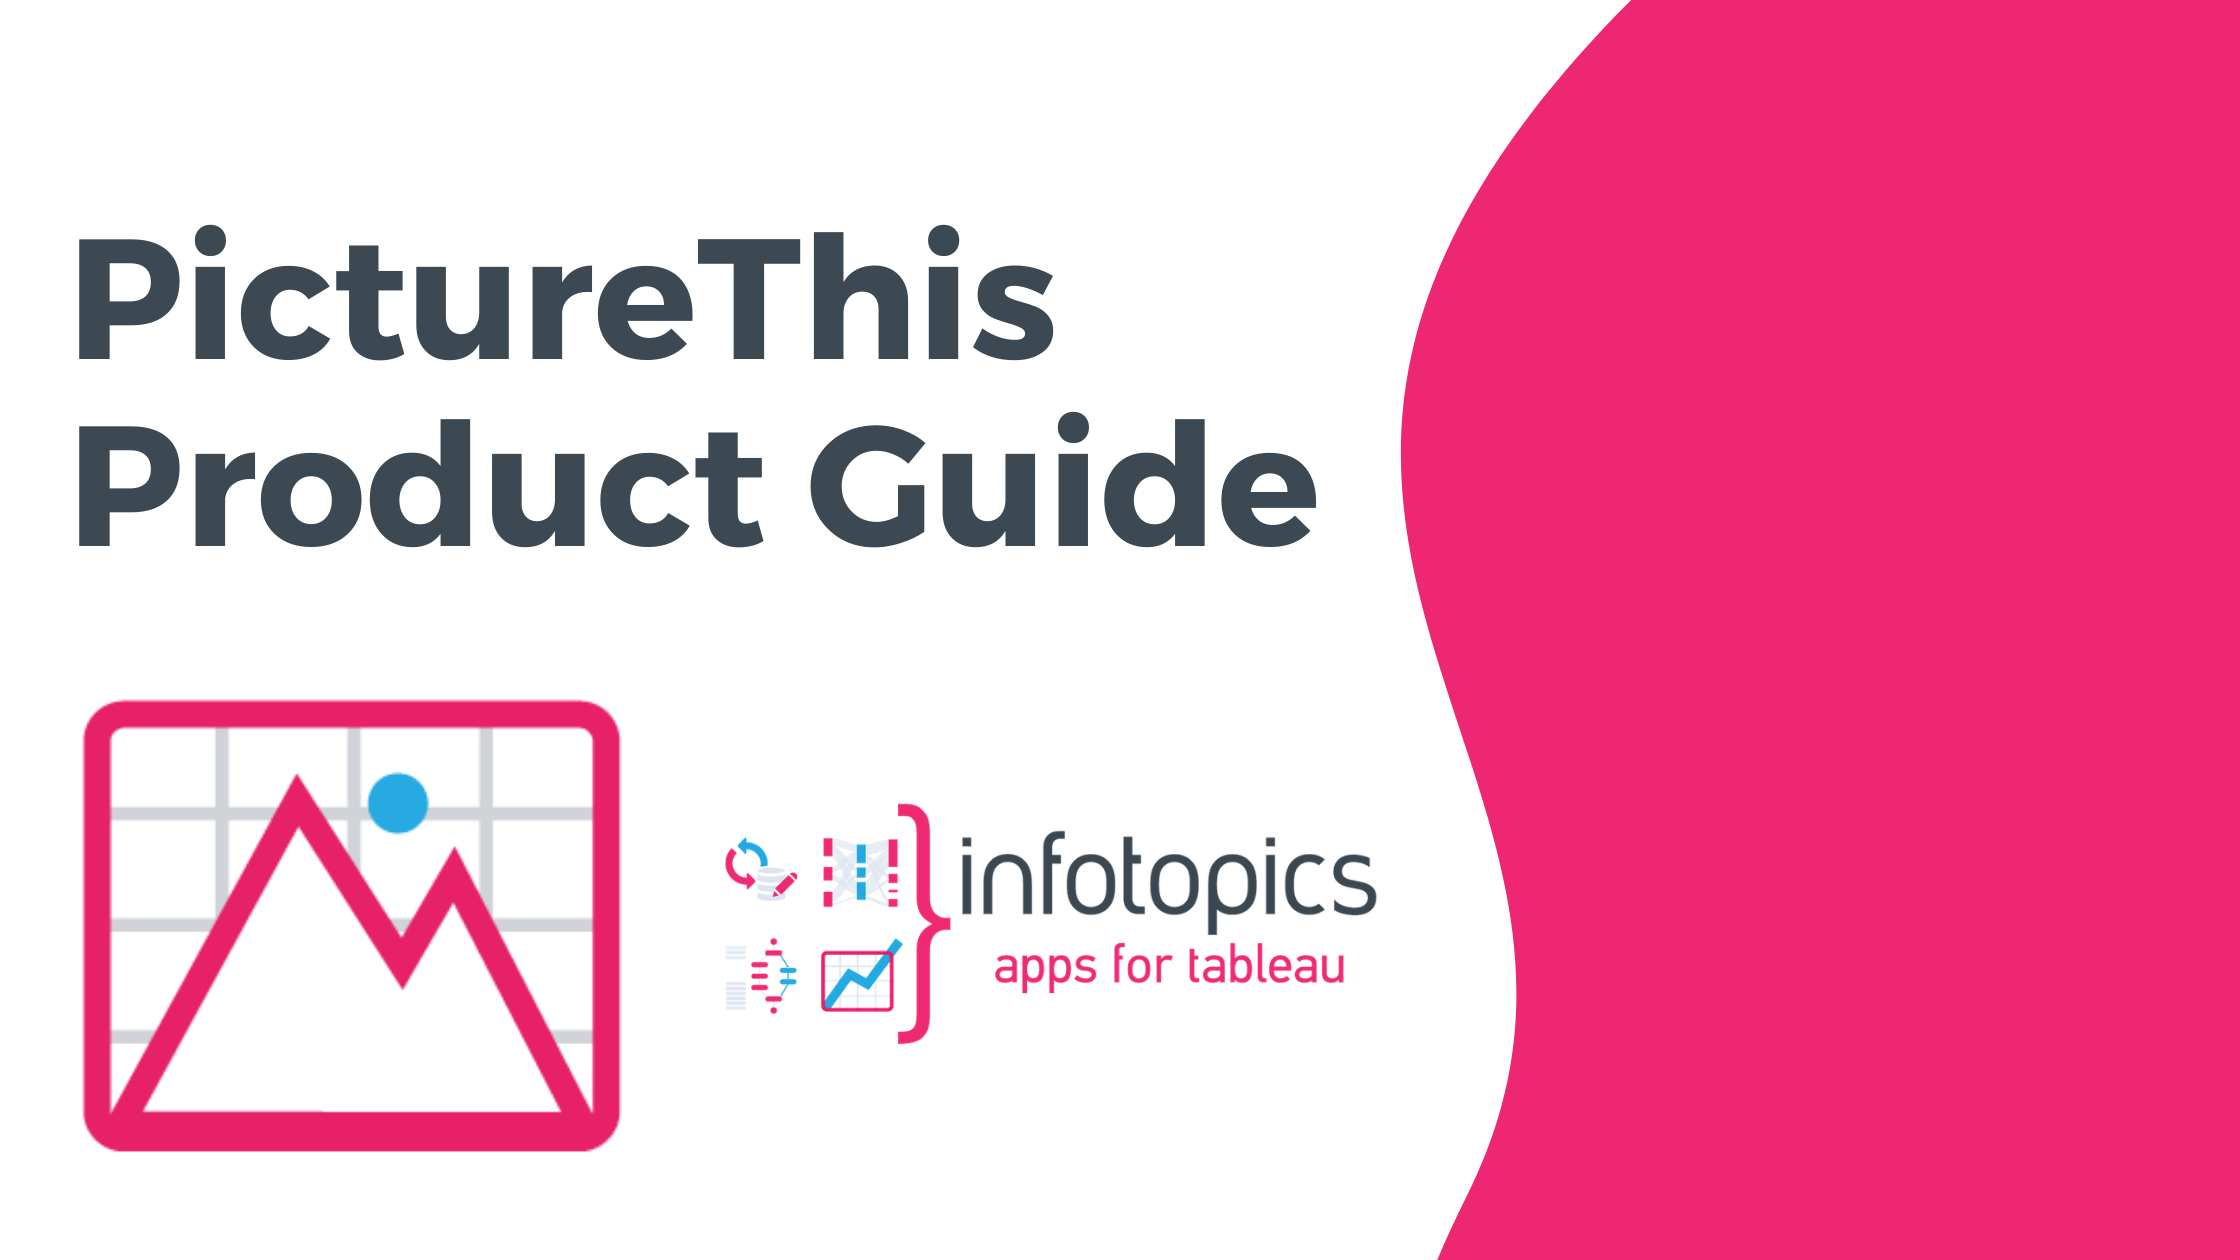 PictureThis Product Guide